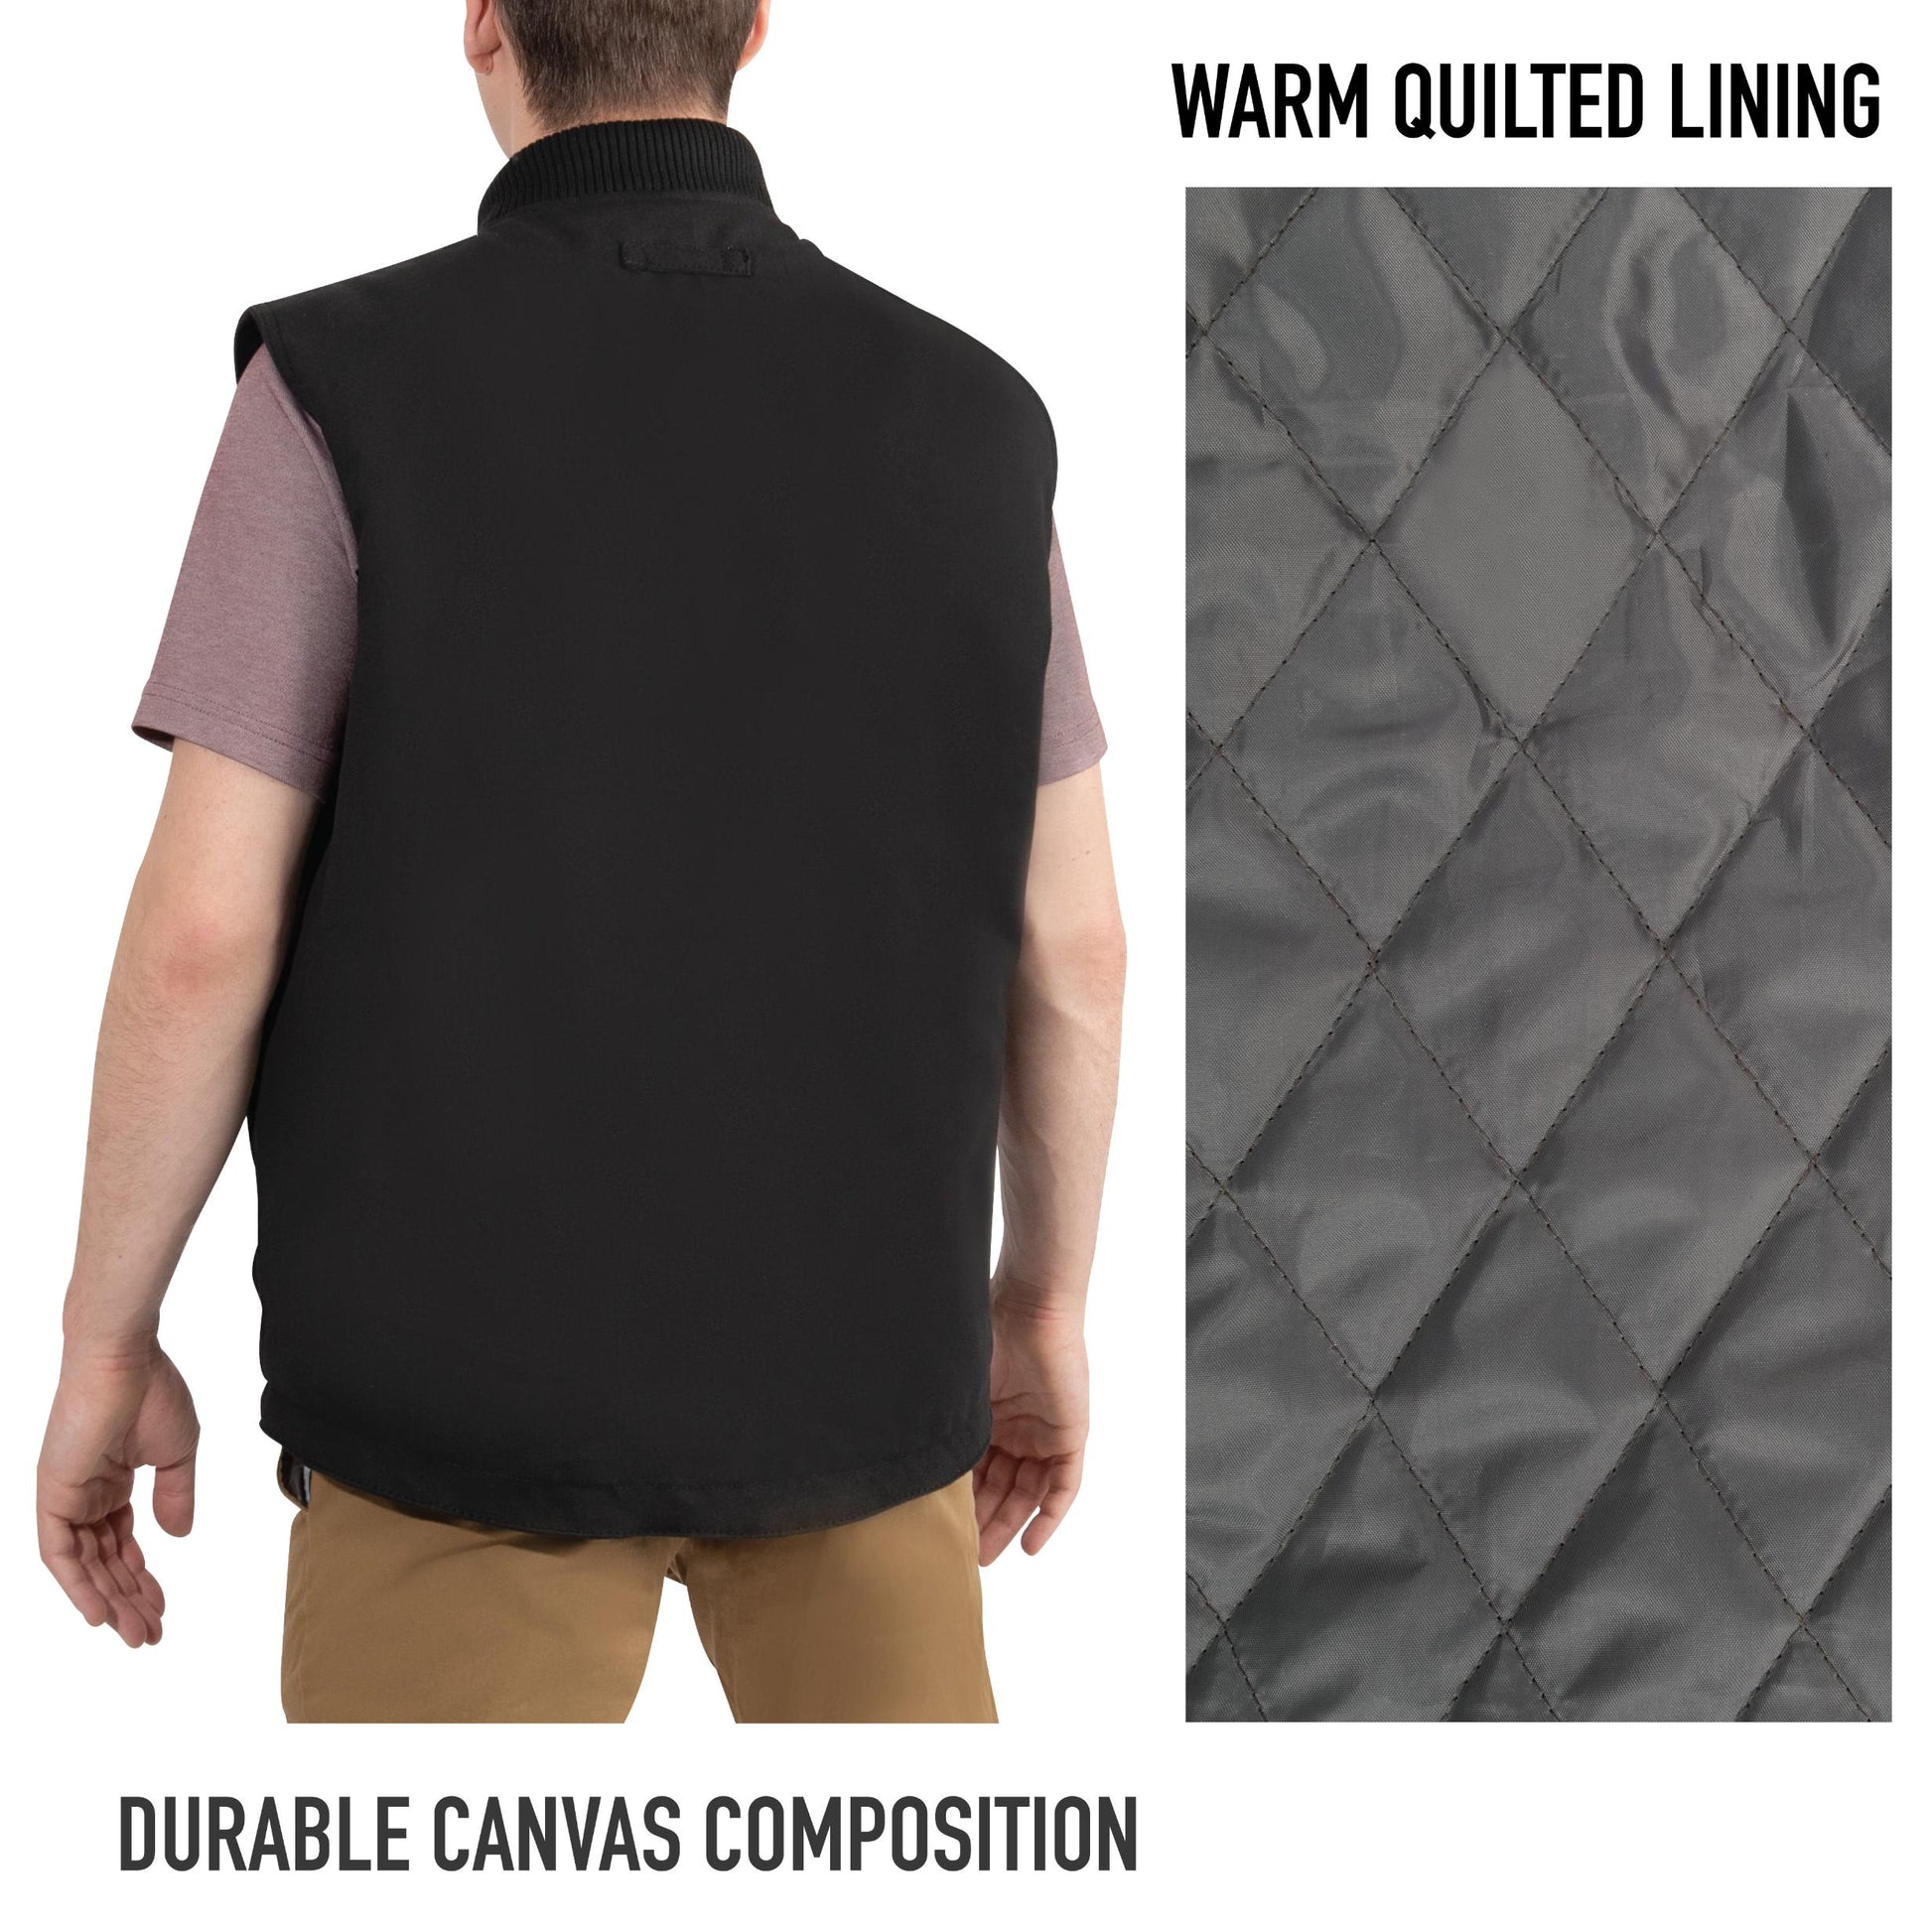 Rothco Concealed Carry Backwoods Canvas Vest - Tactical Choice Plus